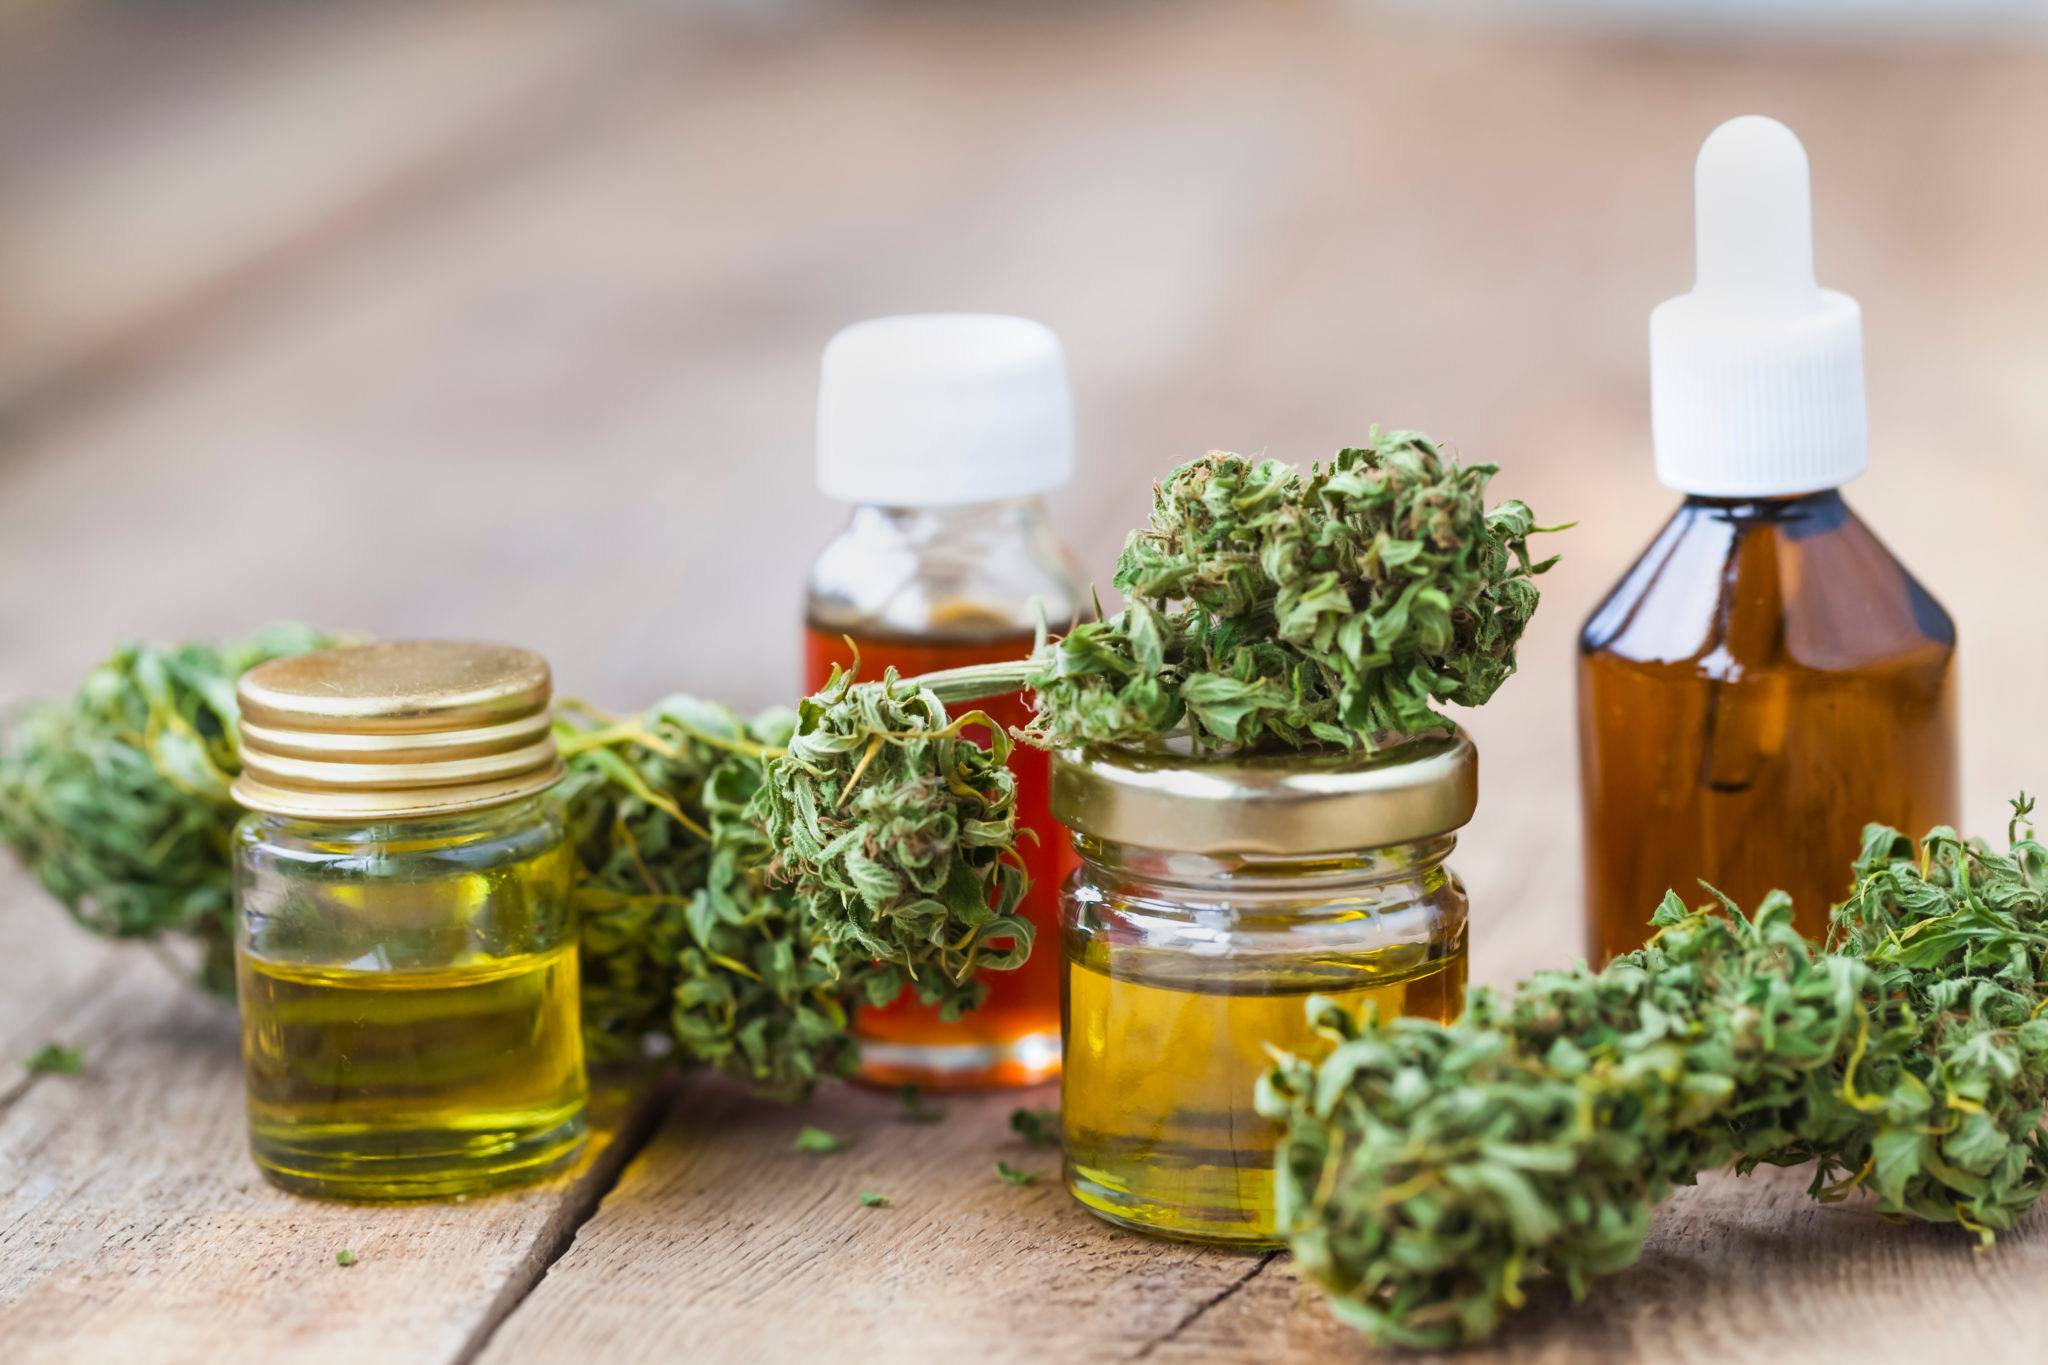 CBD oil helps so many people, but why is CBD expensive? We took a closer look at some of the costs that go into making the supplement. Photo: A collection of CBD tinctures in assorted bottles, decorated with hemp buds.